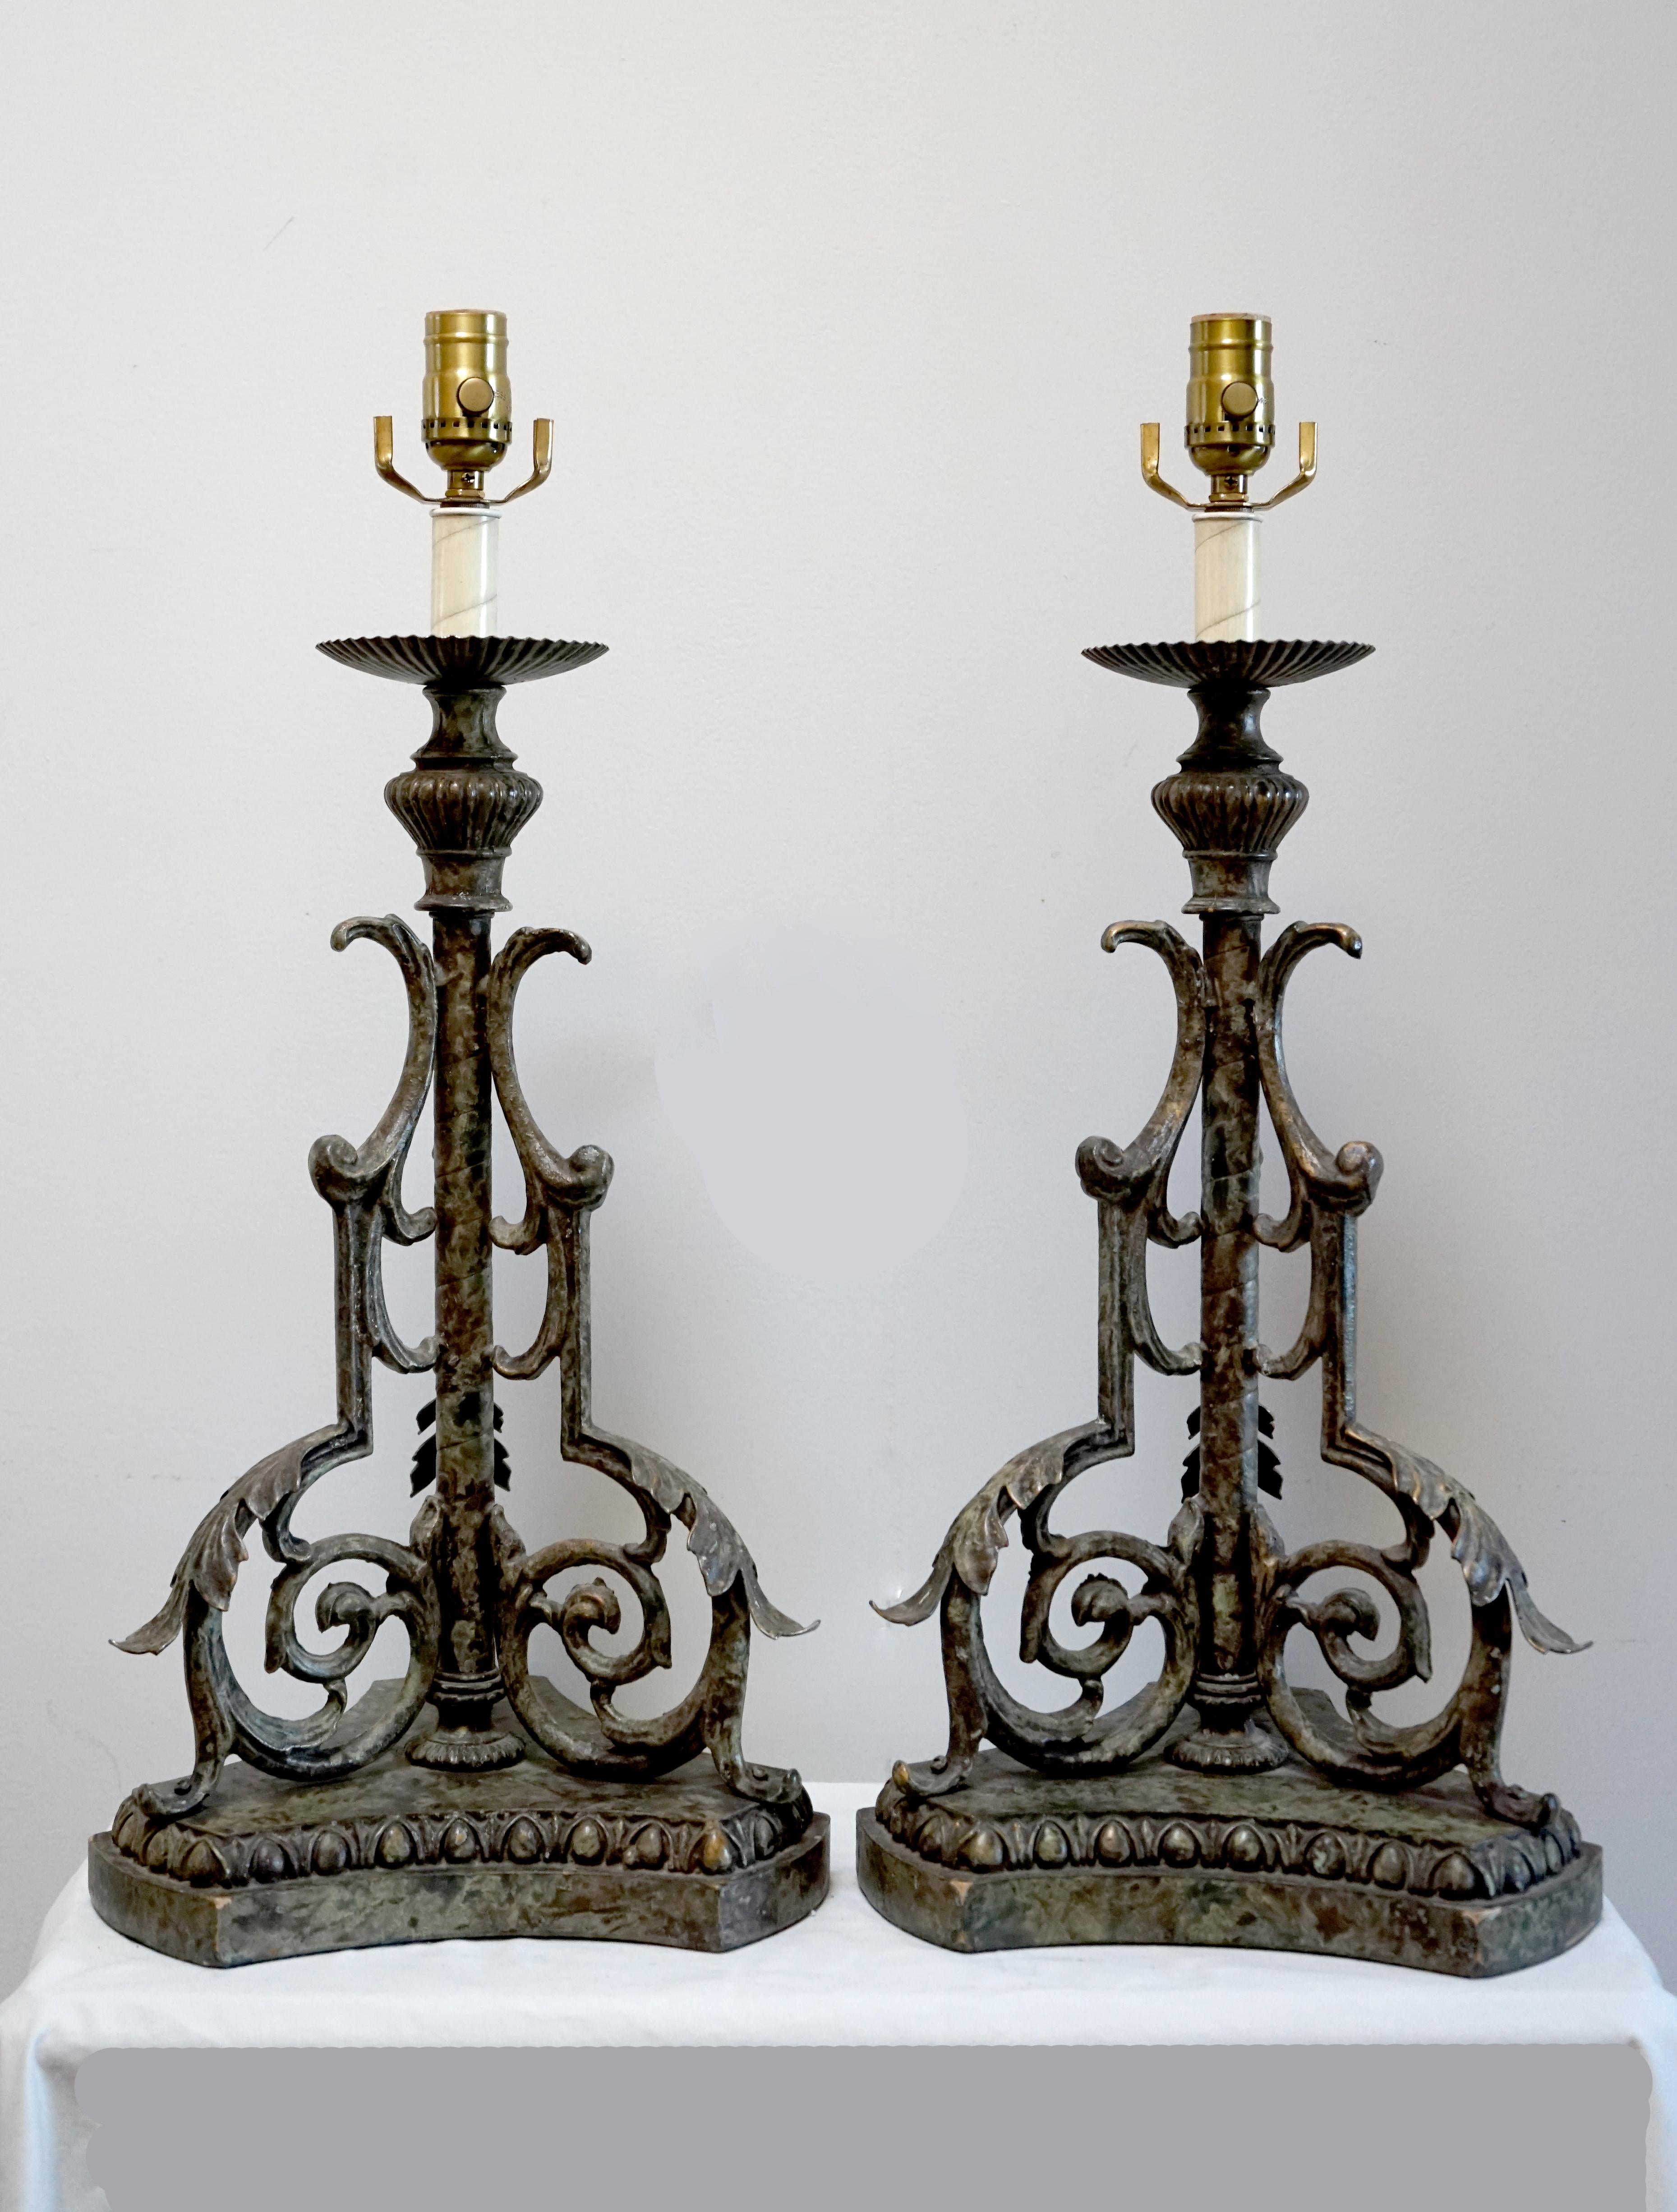 Pair of 19th Century European Pricket Conversion Gothic Table Lamps For Sale 9